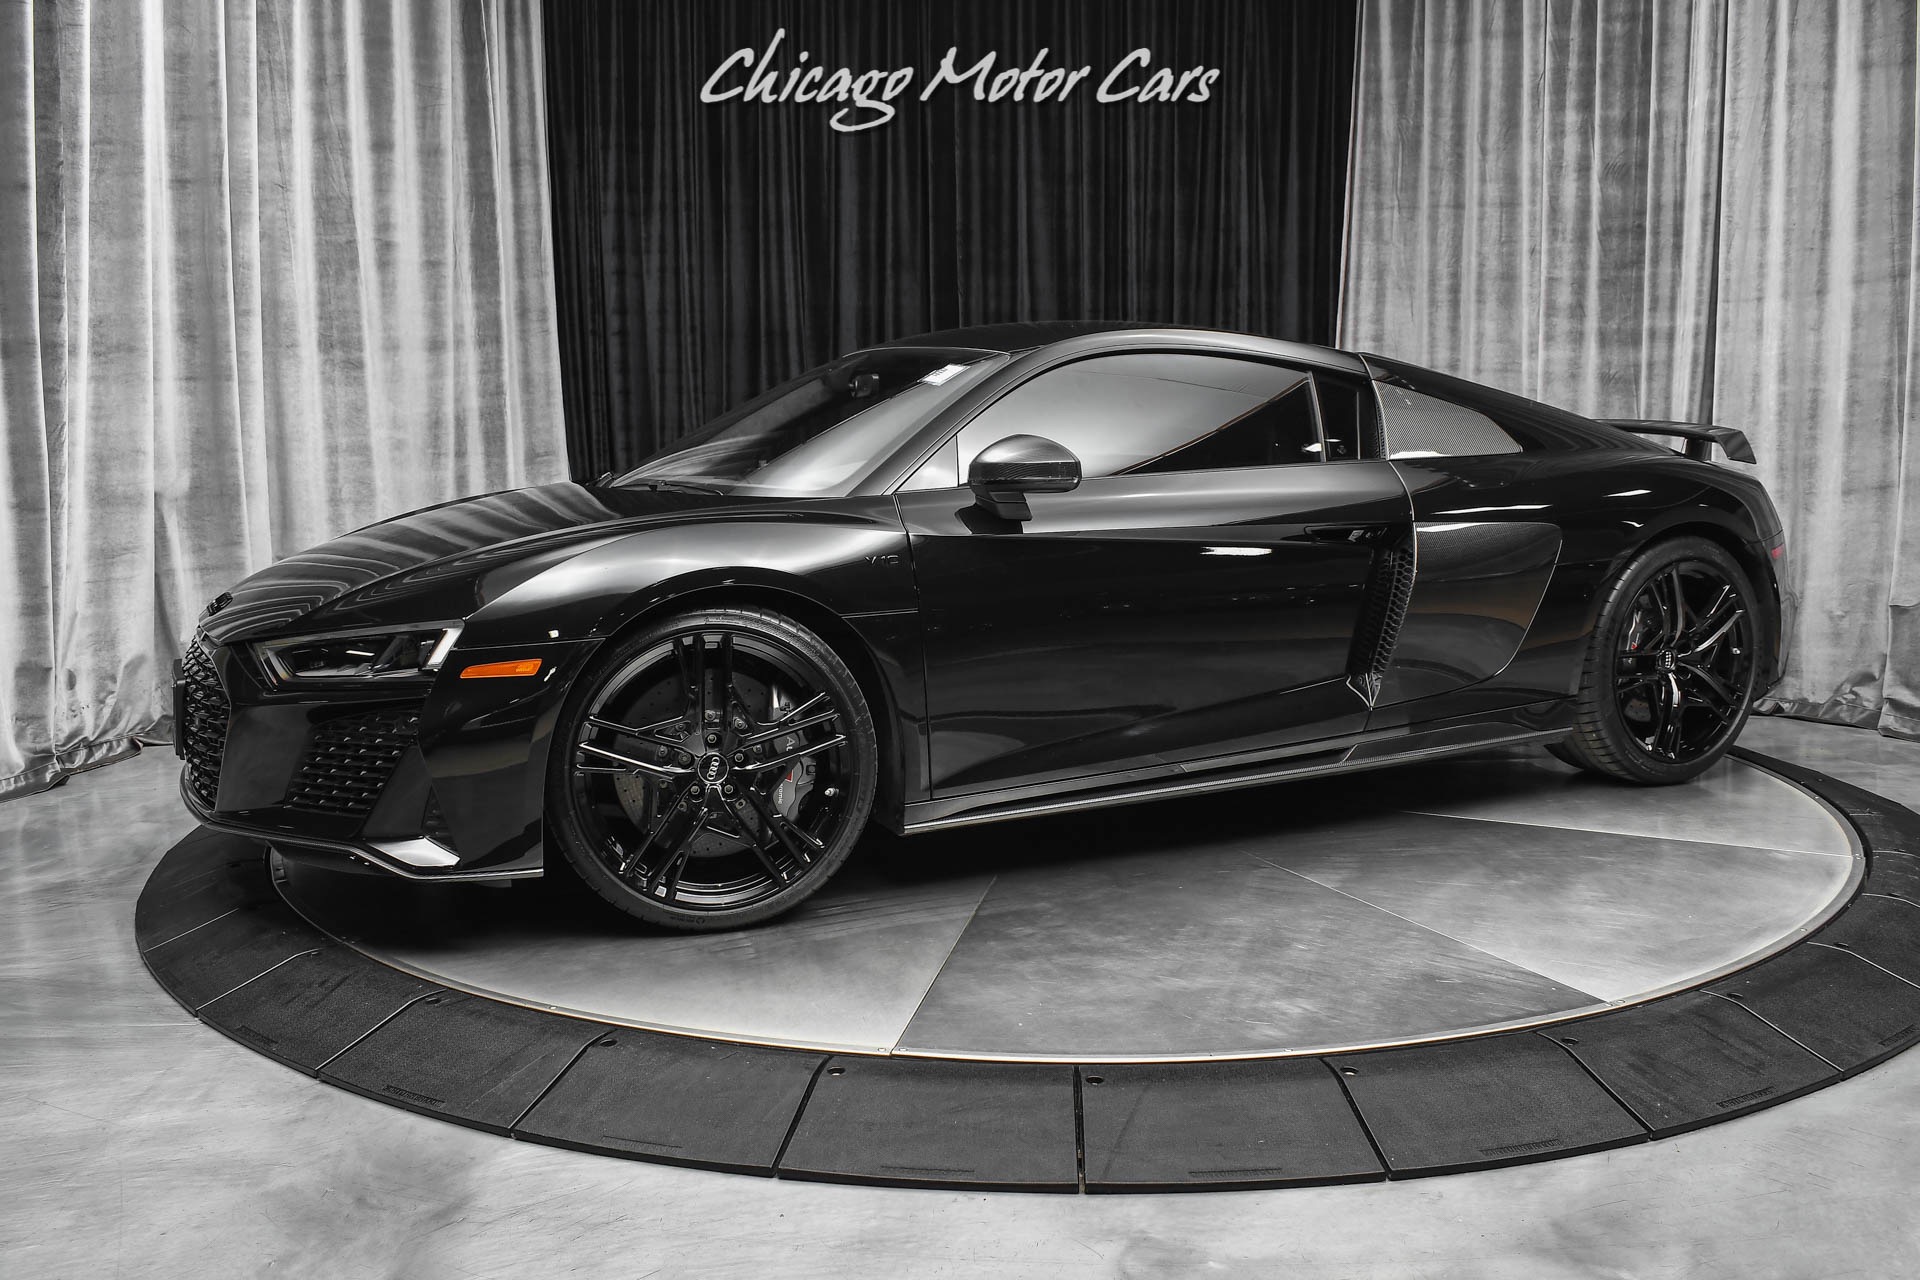 Used-2020-Audi-R8-52-quattro-V10-performance-Coupe-SPORT-PACK-DIAMOND-STITCHED-437-MILES